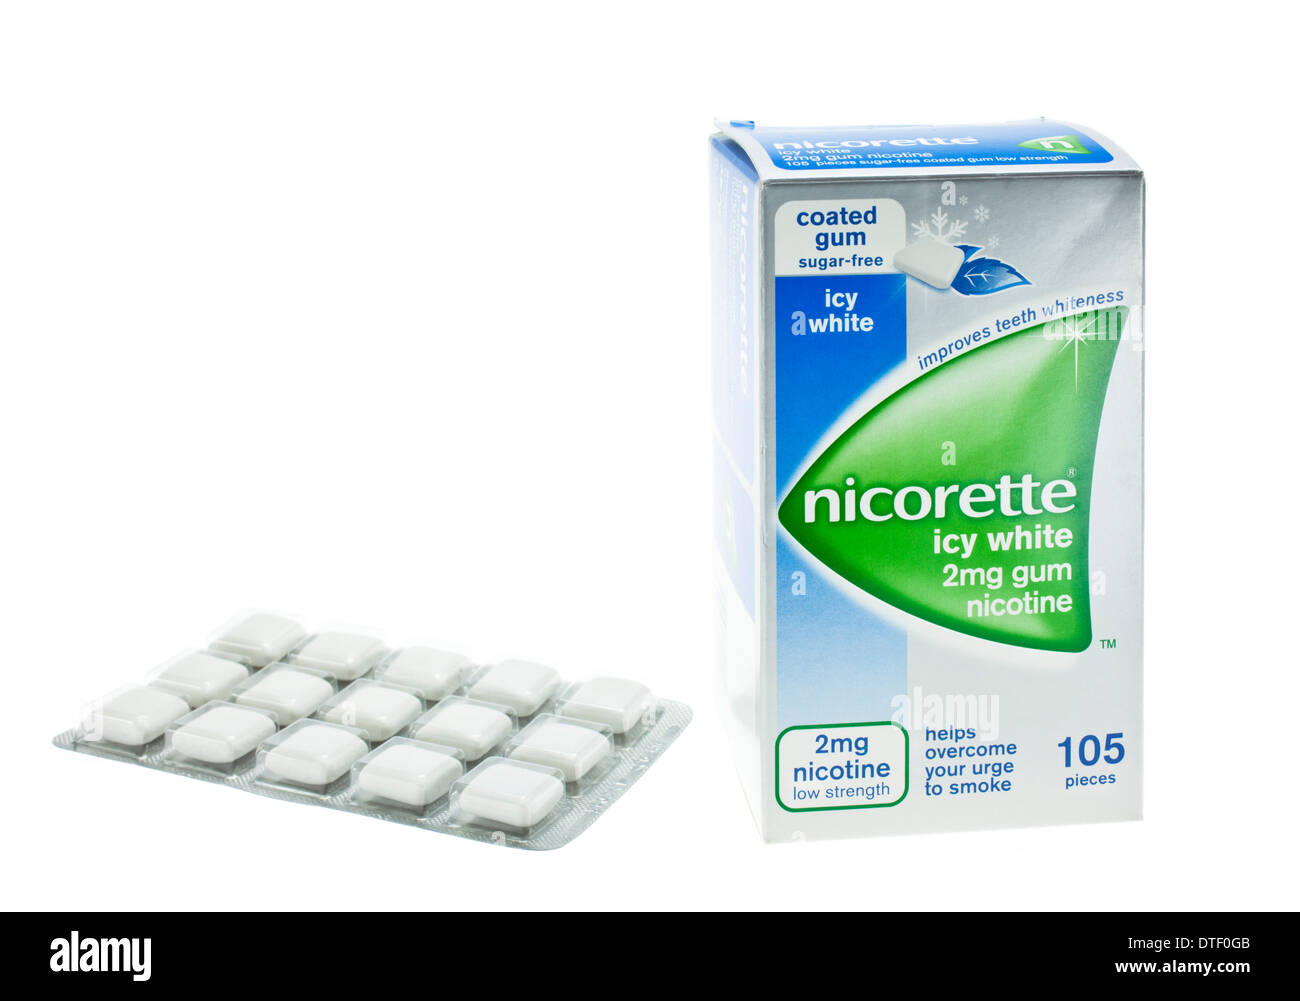 Nicorette chewing gum box and blister pack nicotine replacement treatment on white background Stock Photo